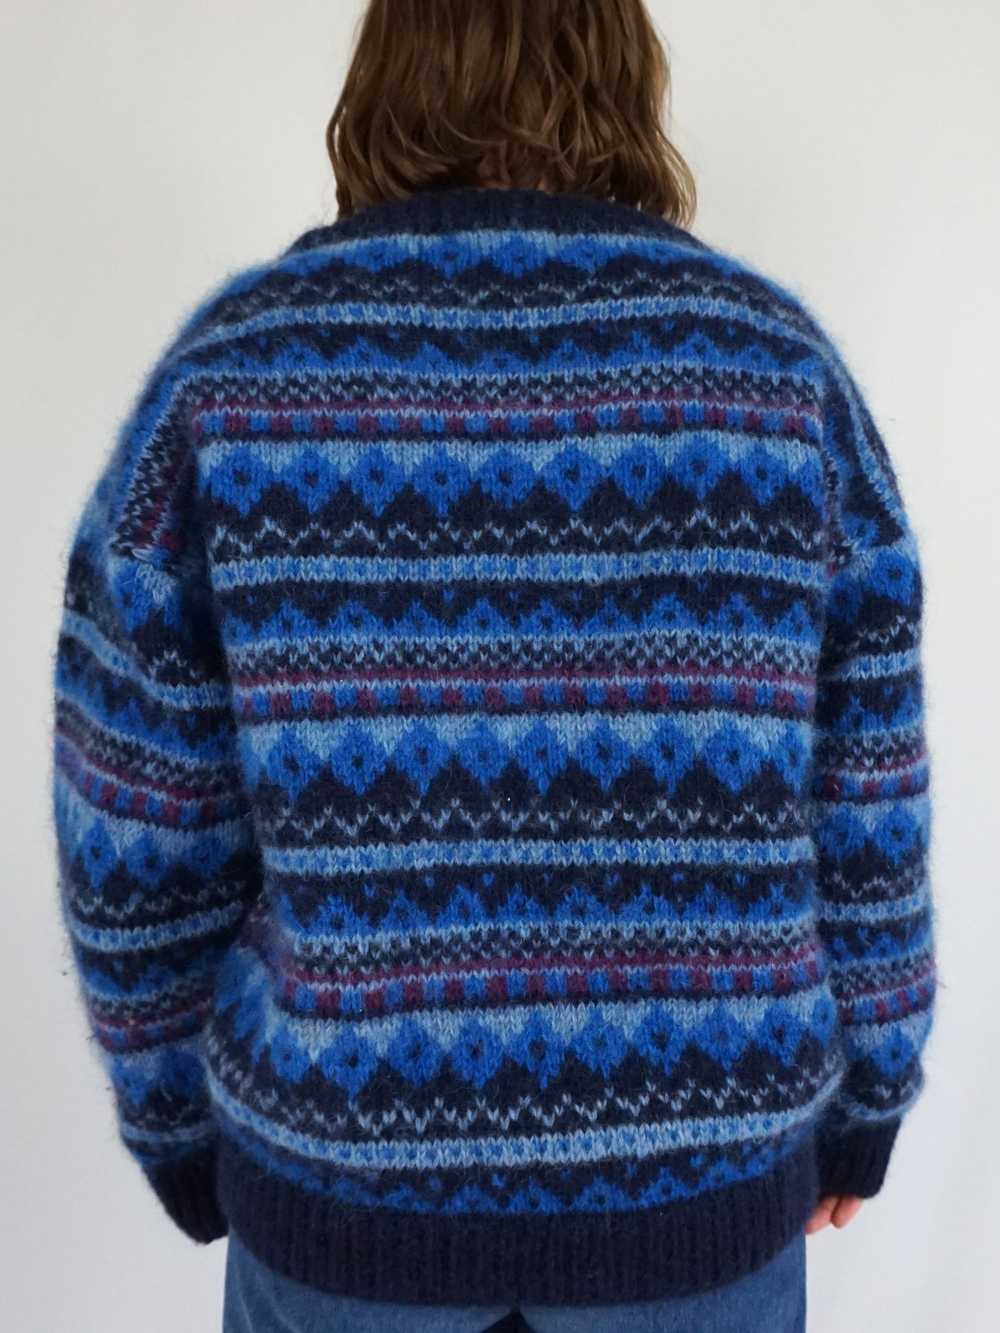 Chunky Wool Patterned Jumper - XL - image 4